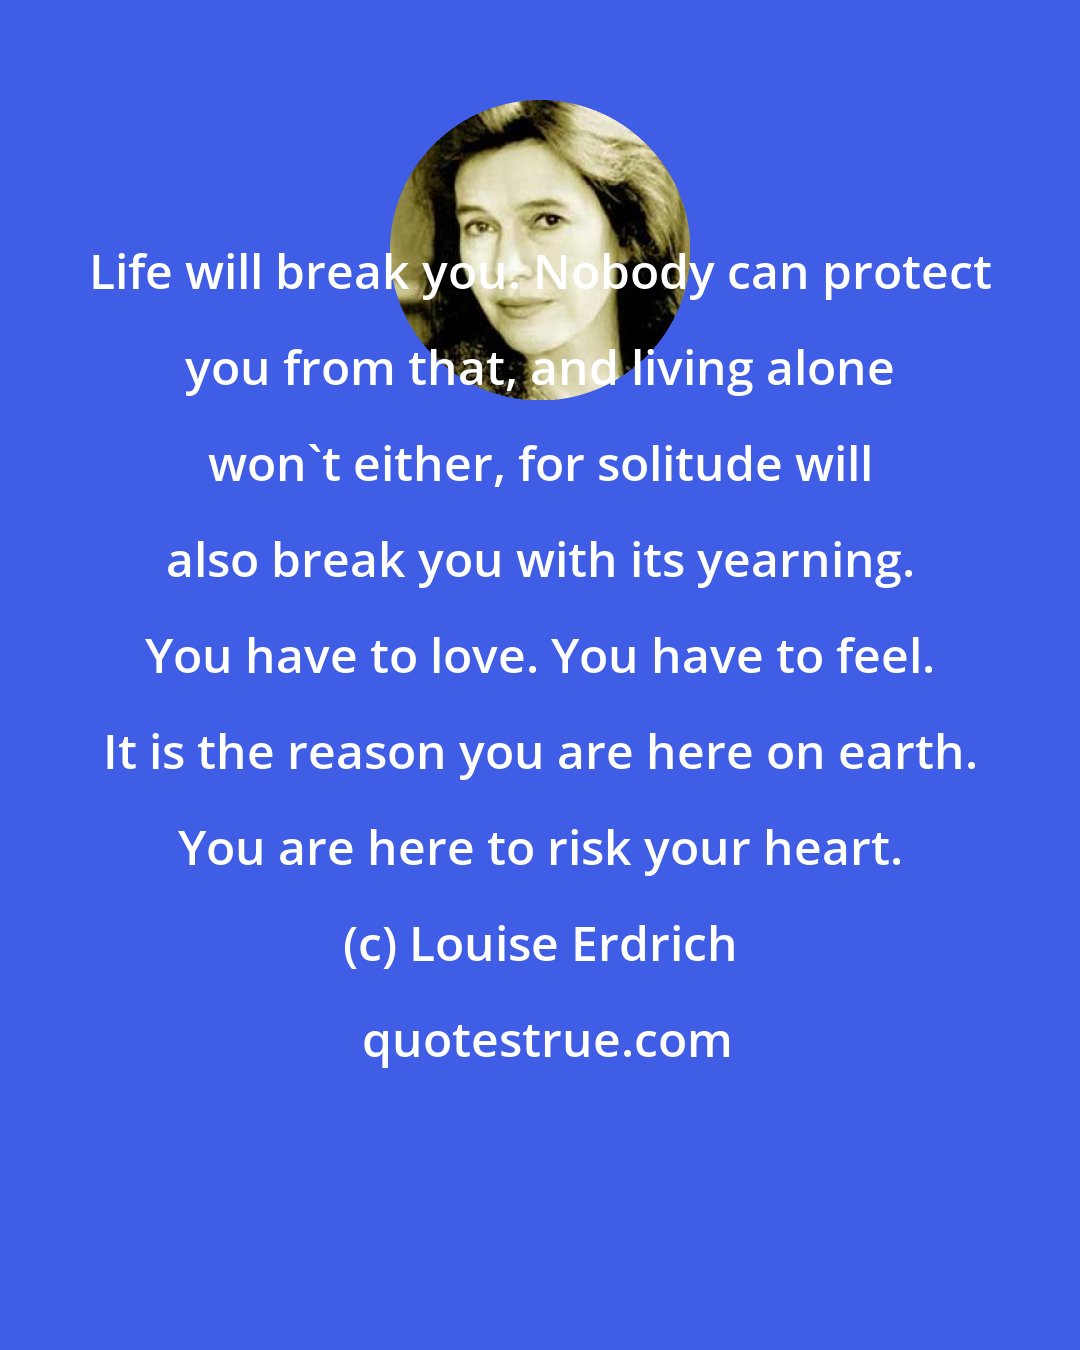 Louise Erdrich: Life will break you. Nobody can protect you from that, and living alone won't either, for solitude will also break you with its yearning. You have to love. You have to feel. It is the reason you are here on earth. You are here to risk your heart.